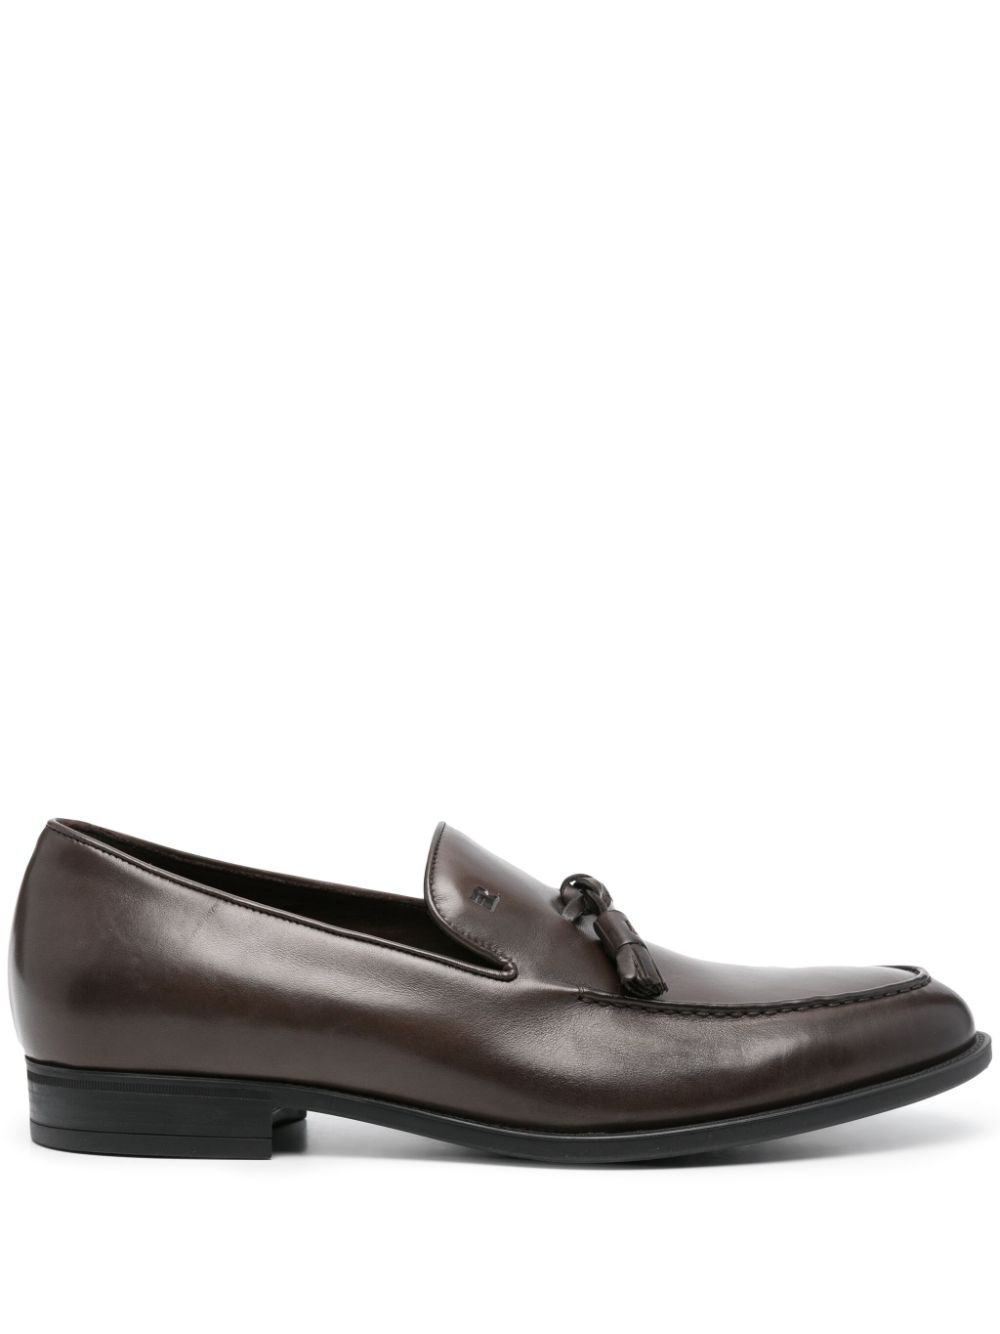 Fratelli Rossetti Tassel-detail Leather Loafers In Brown